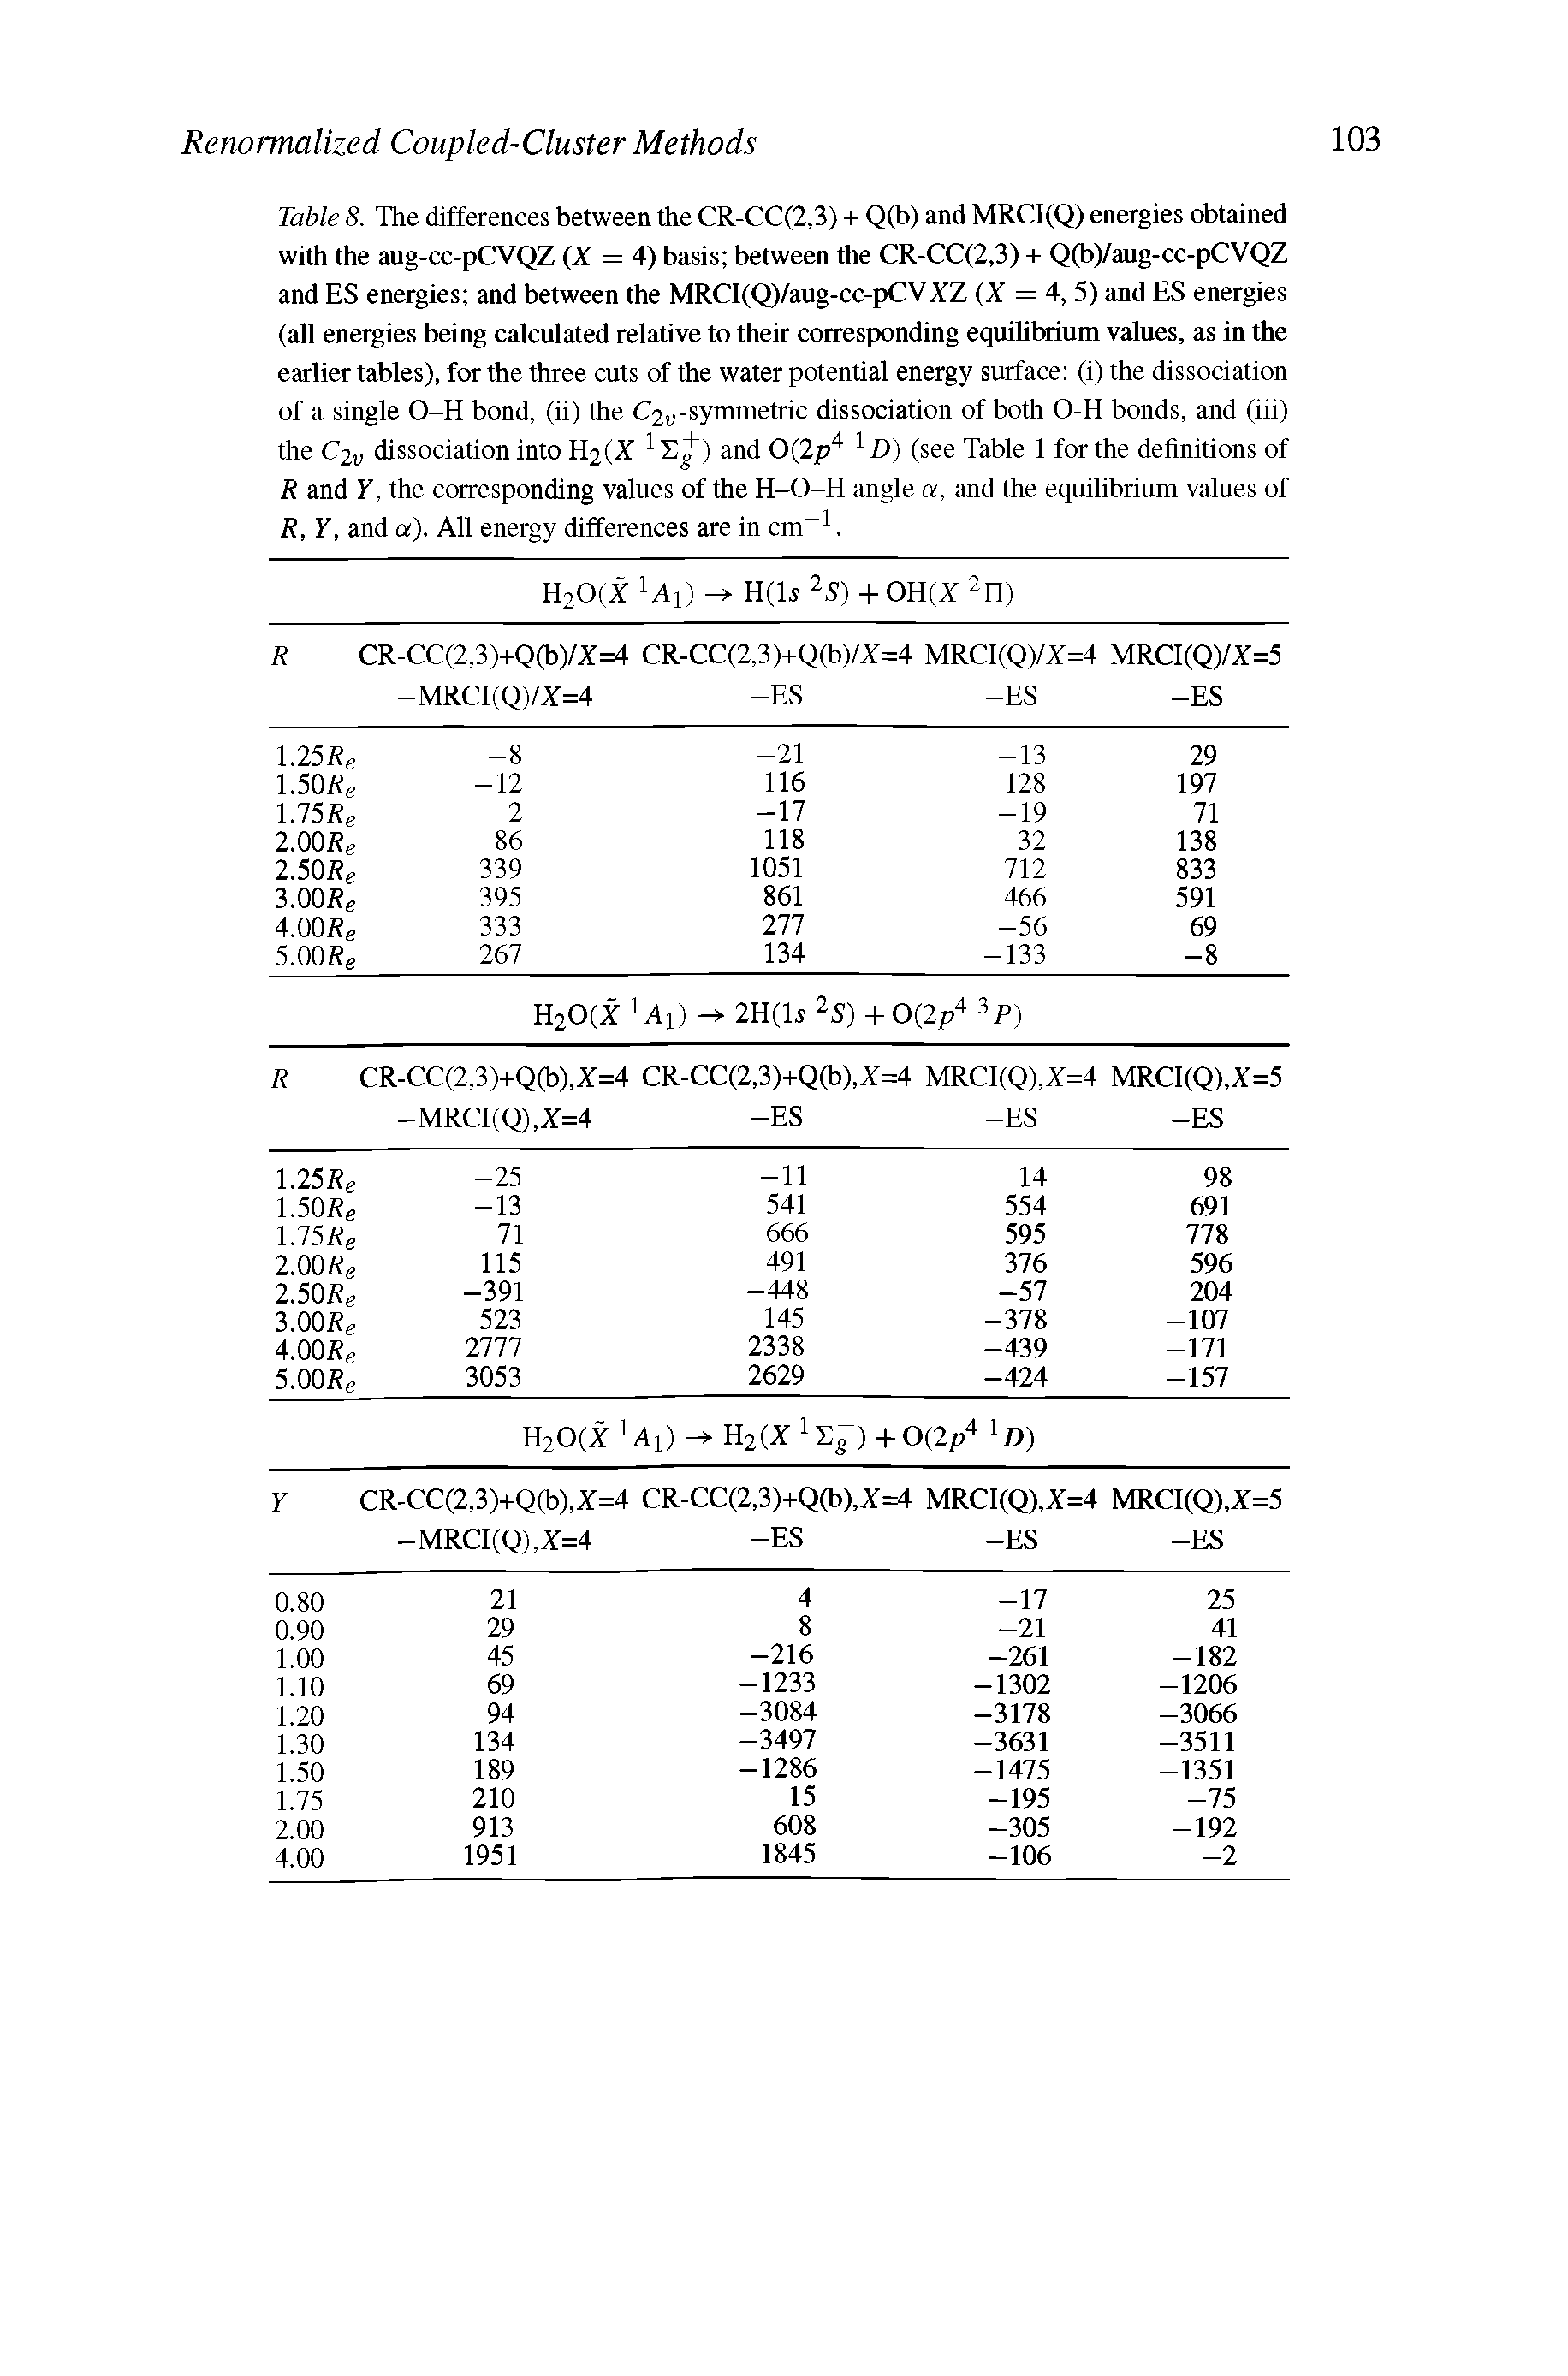 Table 8. The differences between the CR-CC(2,3) + Q(t>) and MRCI(Q) energies obtained with the aug-cc-pCVQZ (X = 4) basis between the CR-CC(2,3) + Q(b)/aug-cc-pCVQZ and ES energies and between the MRCI(Q)/aug-cc-pCVXZ (X = 4,5) and ES energies (all energies being calculated relative to their corresponding equilibrium values, as in the earlier tables), for the three cuts of the water potential energy surface (i) the dissociation of a single O-H bond, (ii) the C2 -symmetric dissociation of both O-H bonds, and (iii) the C2v dissociation into U2(X 1 Eg") and 0(2 p4 1D) (see Table 1 for the definitions of R and Y, the corresponding values of the H-O-H angle a, and the equilibrium values of R, Y, and a). All energy differences are in cm-1.